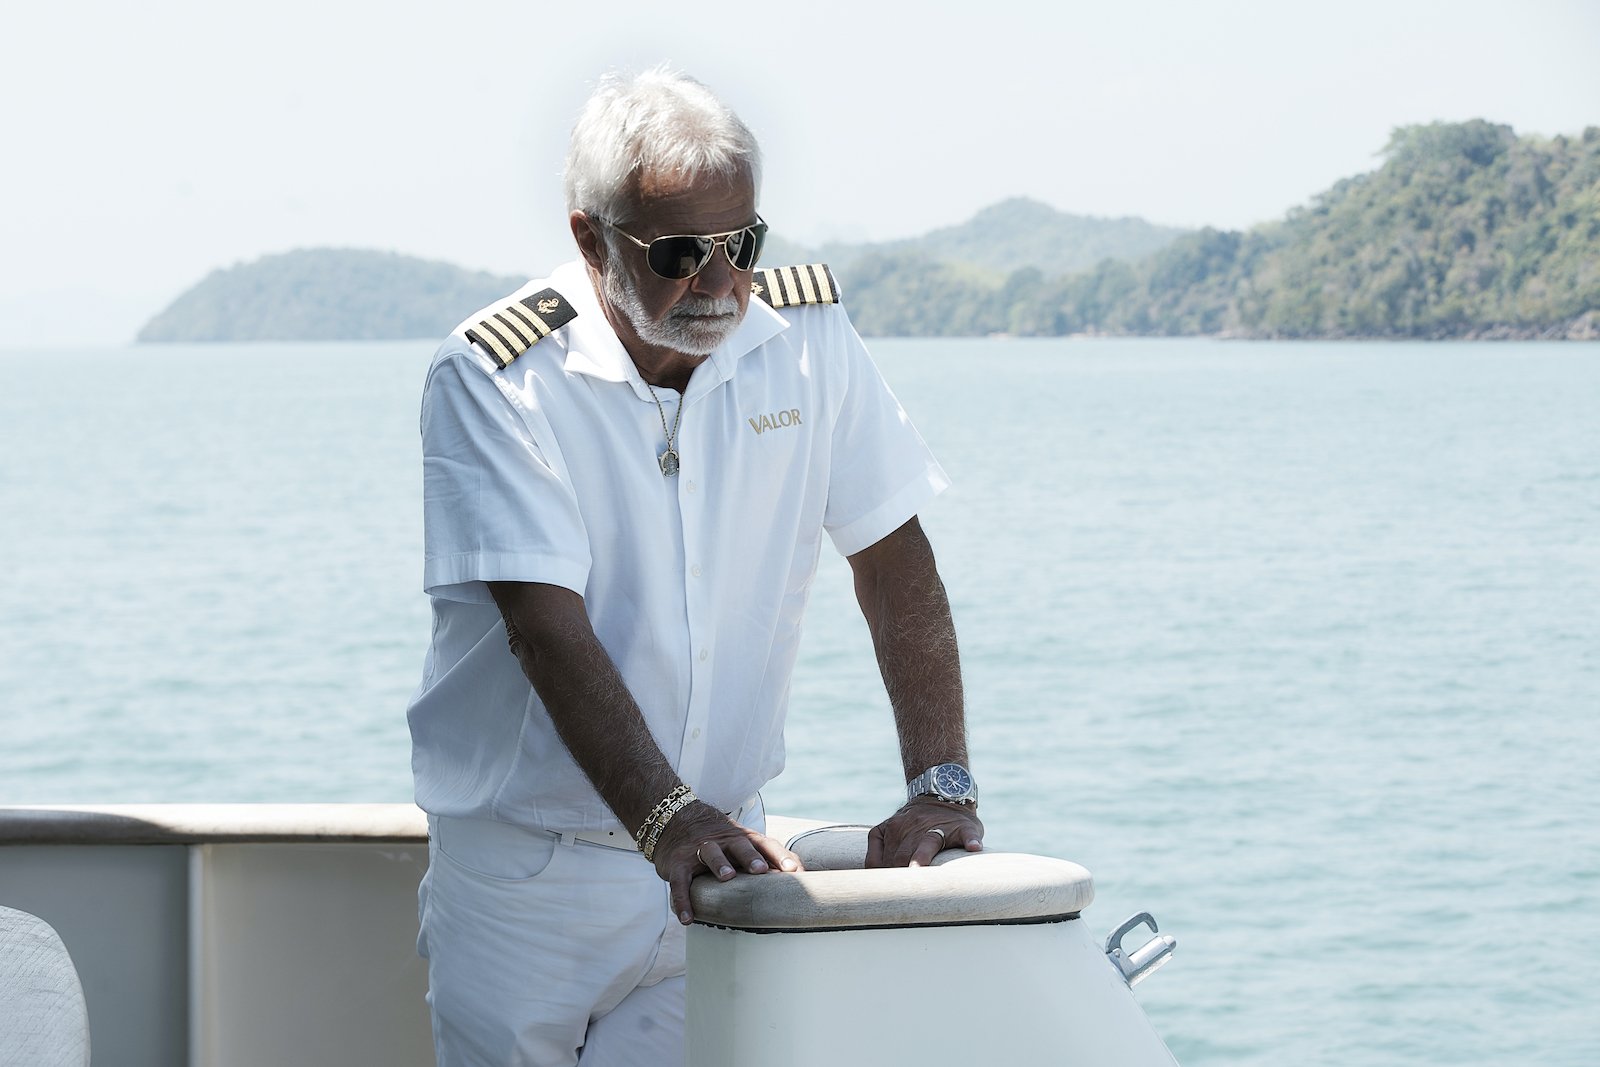 Captain Lee Rosbach from Below Deck getting ready to dock the boat